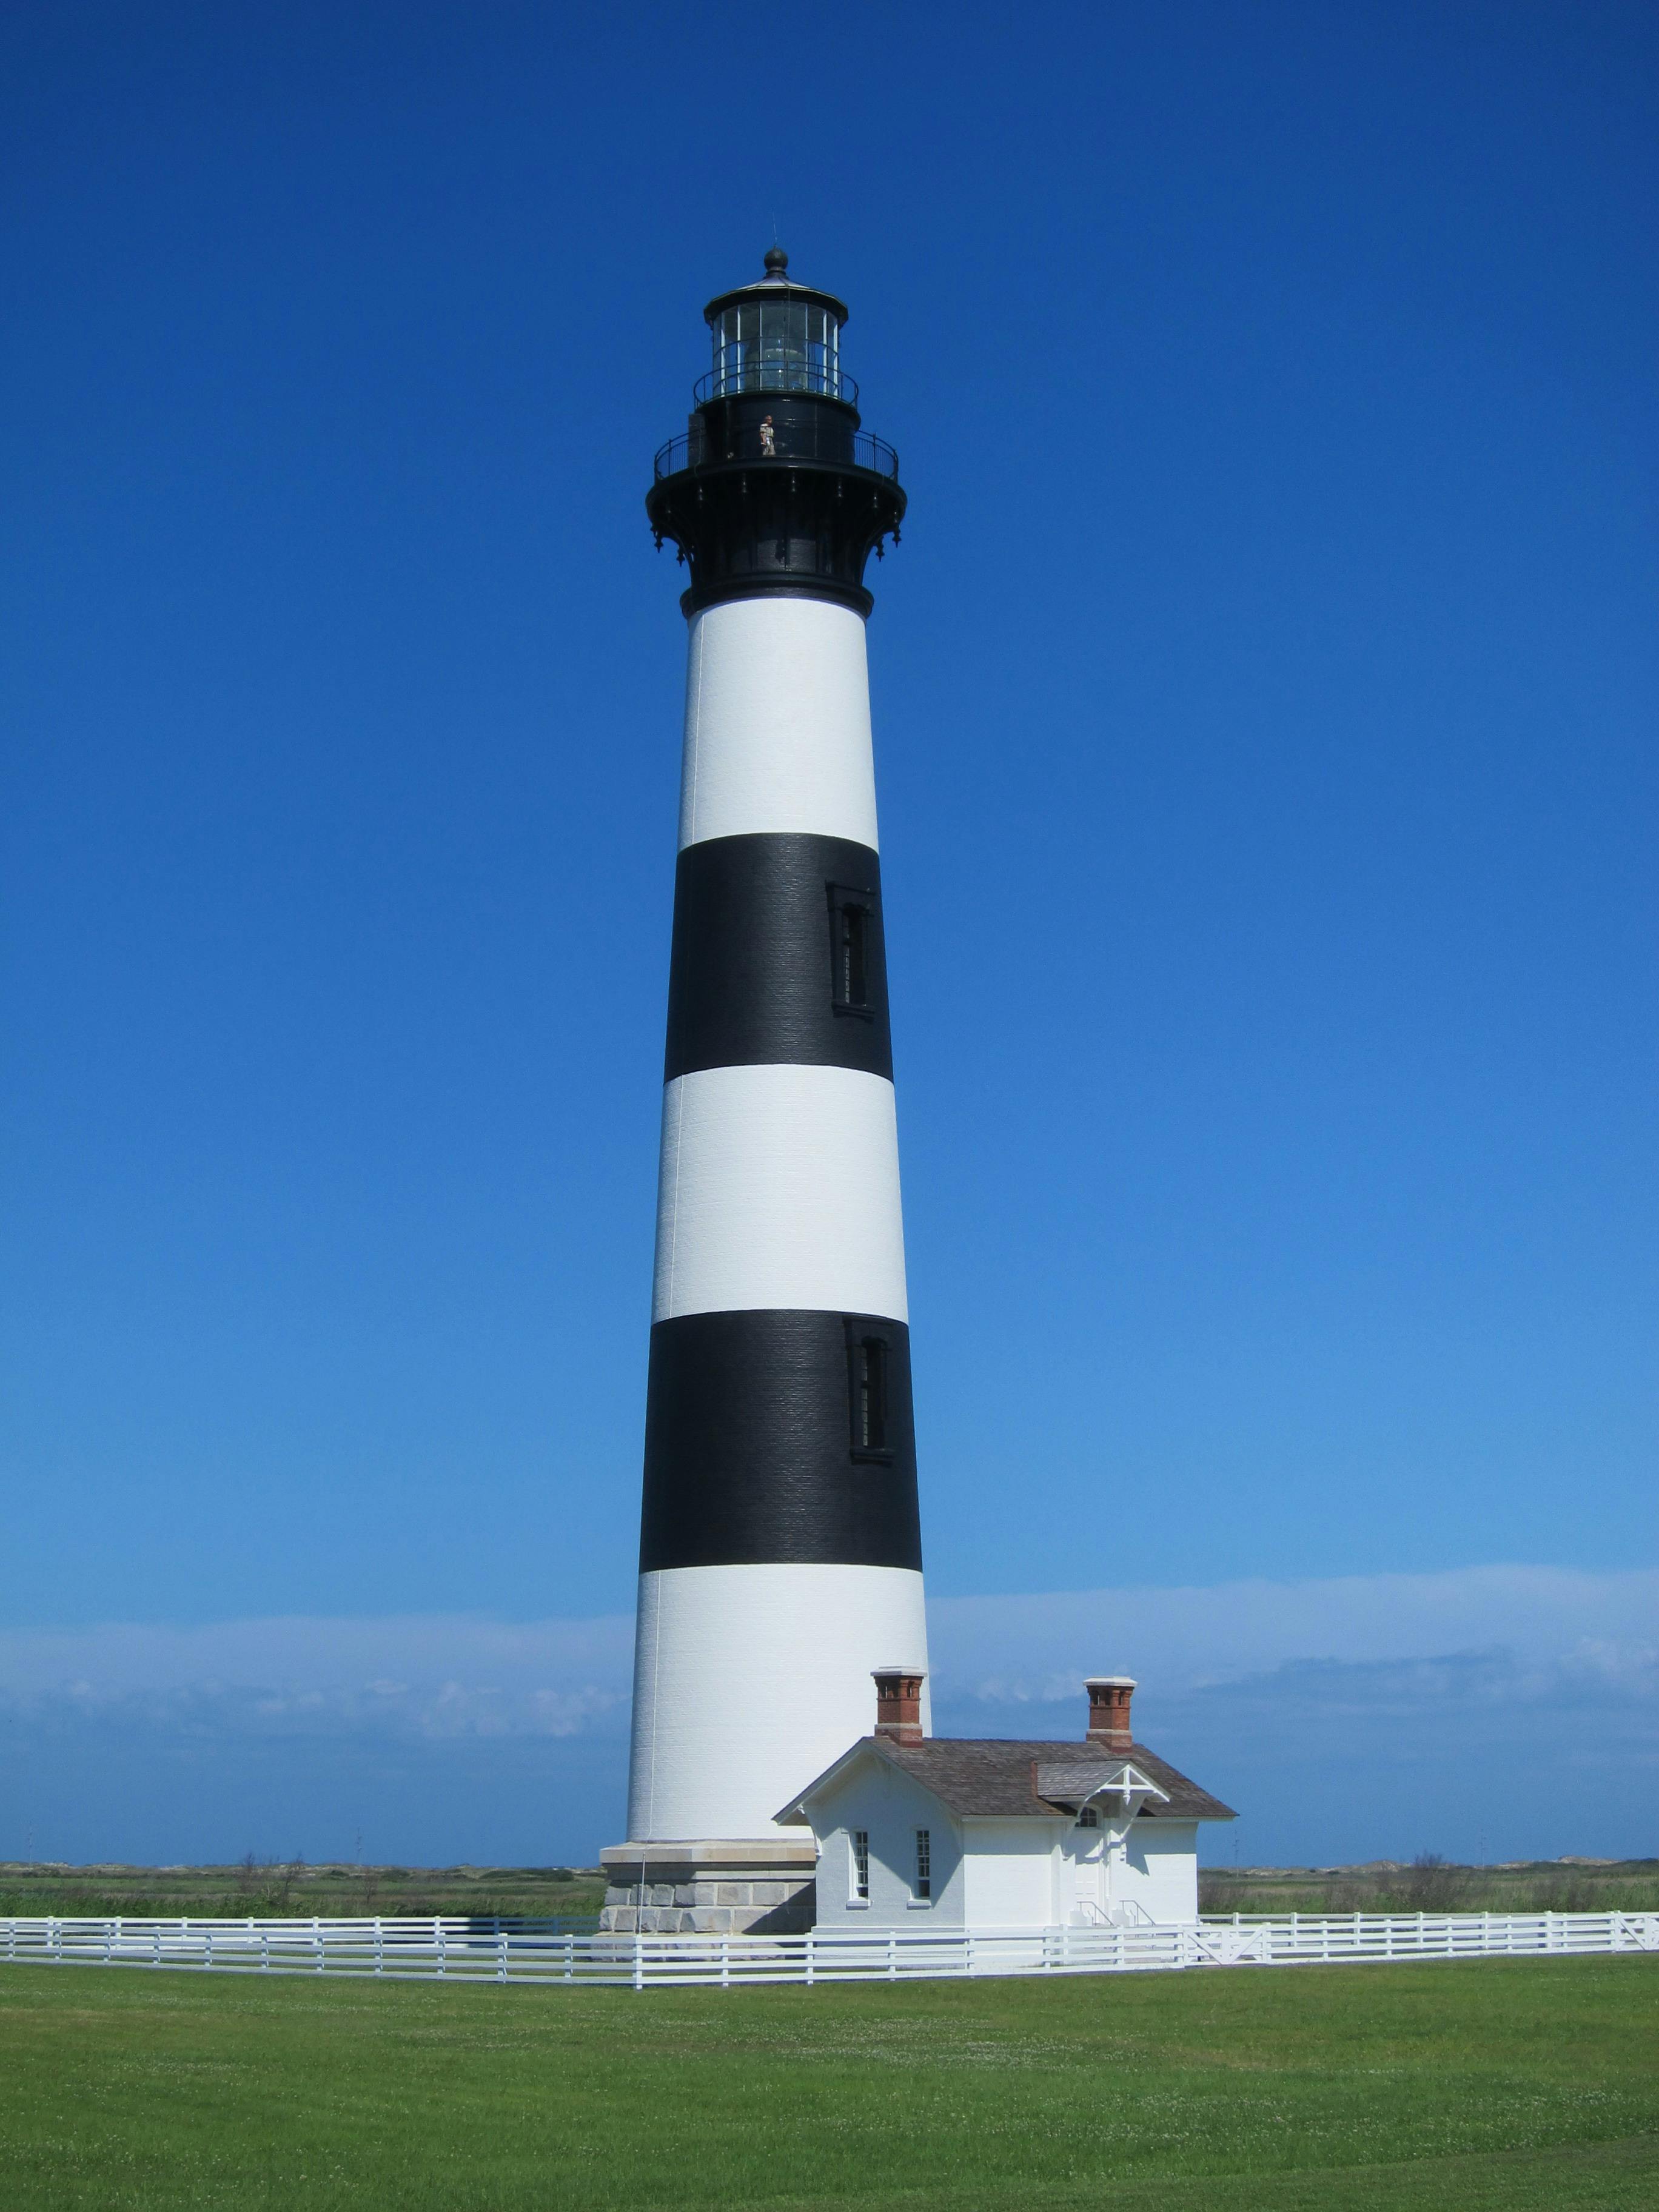 White And Black Striped Lighthouse Beside White House · Free Stock Photo